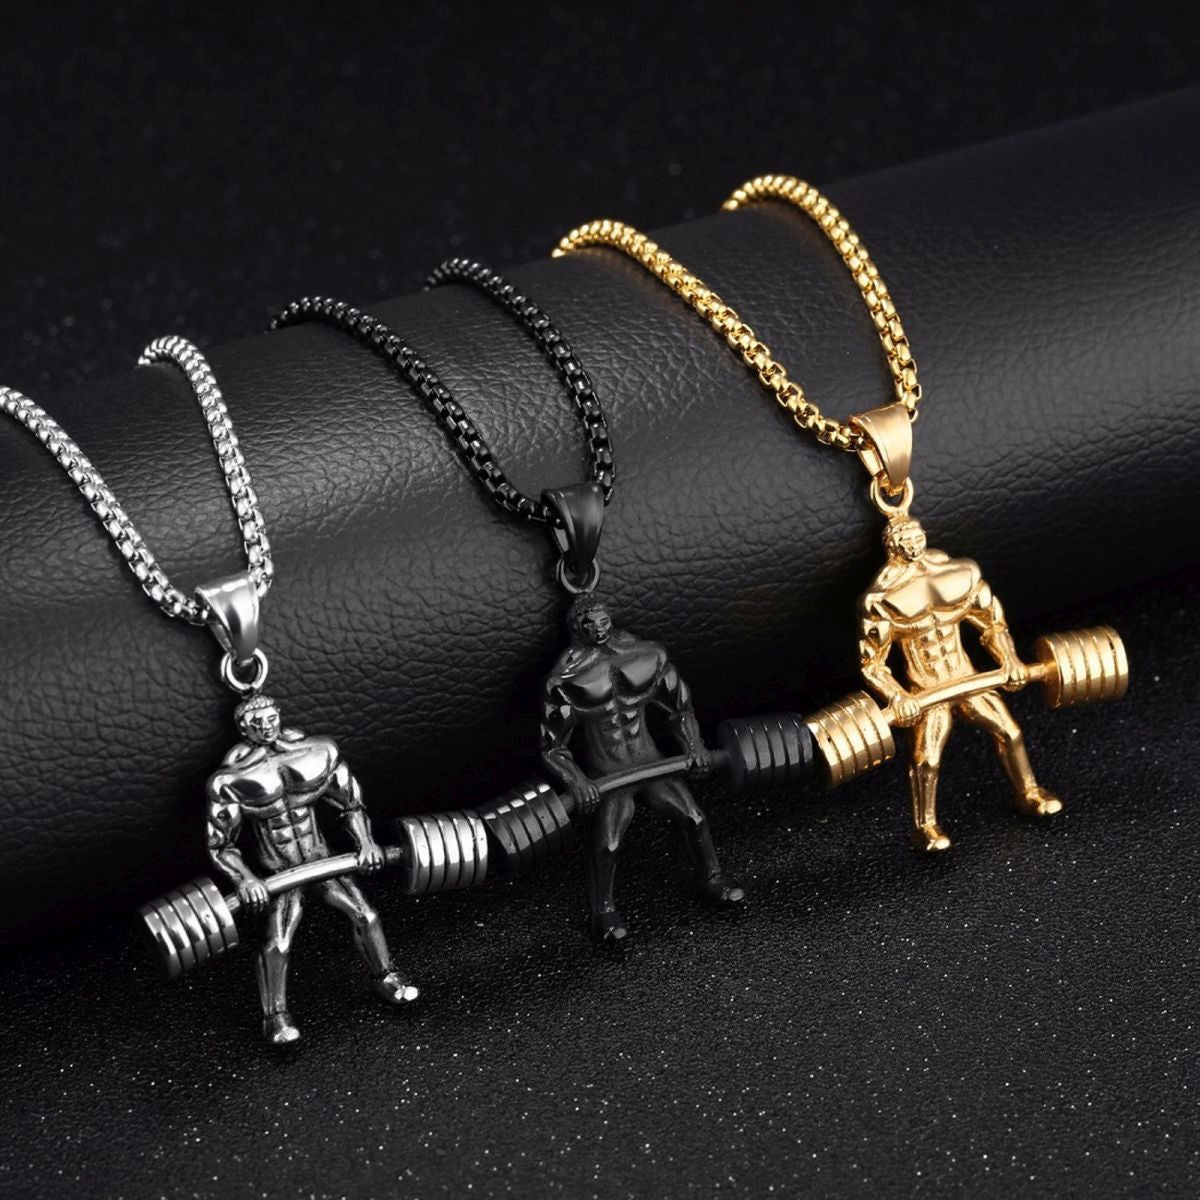 Barbell Dumbell Body Builder Weight Lifter Gold Stainless Steel Pendant Chain